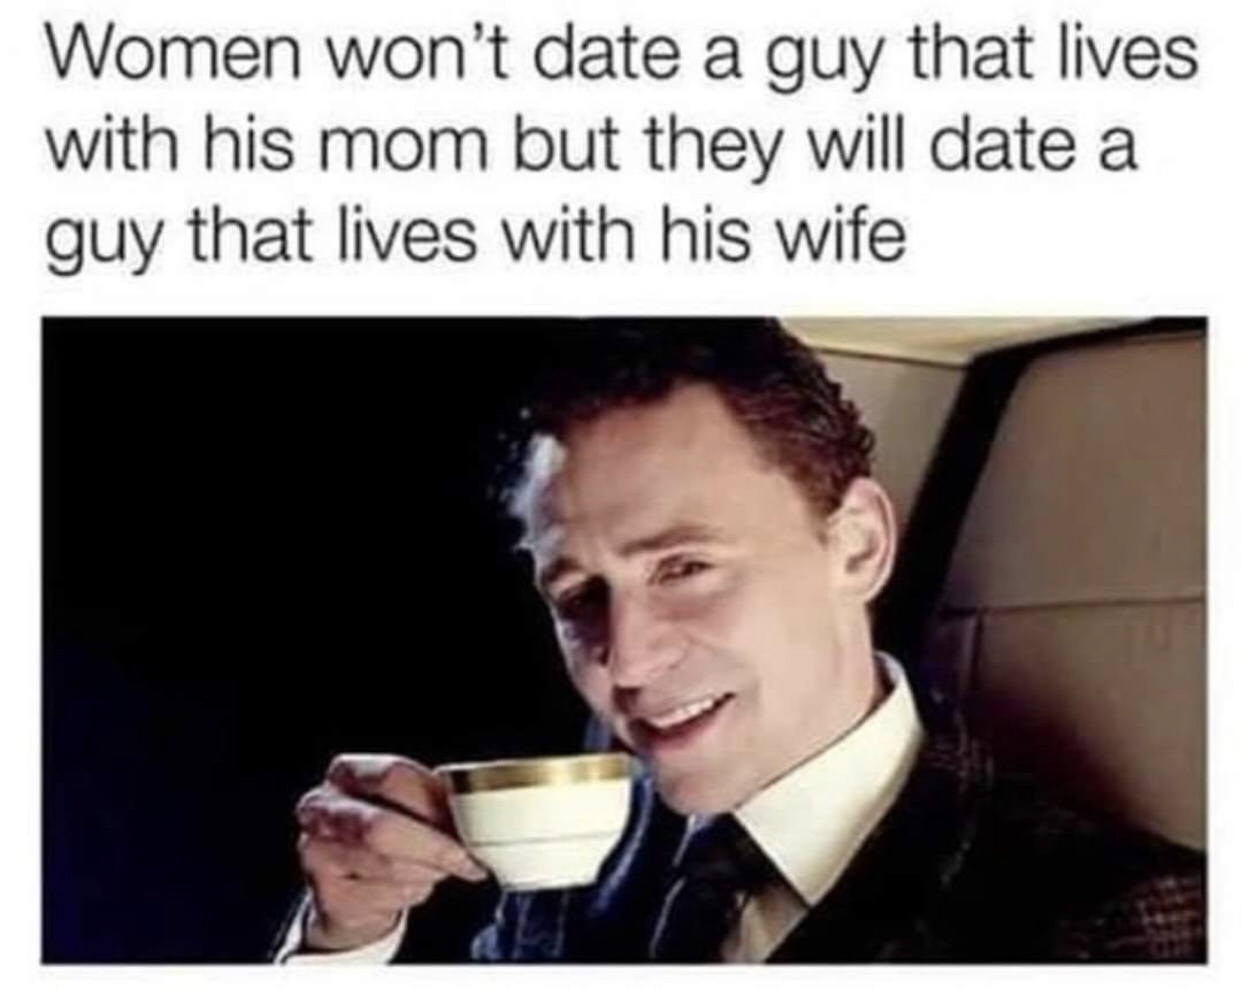 dry january gif - Women won't date a guy that lives with his mom but they will date a guy that lives with his wife